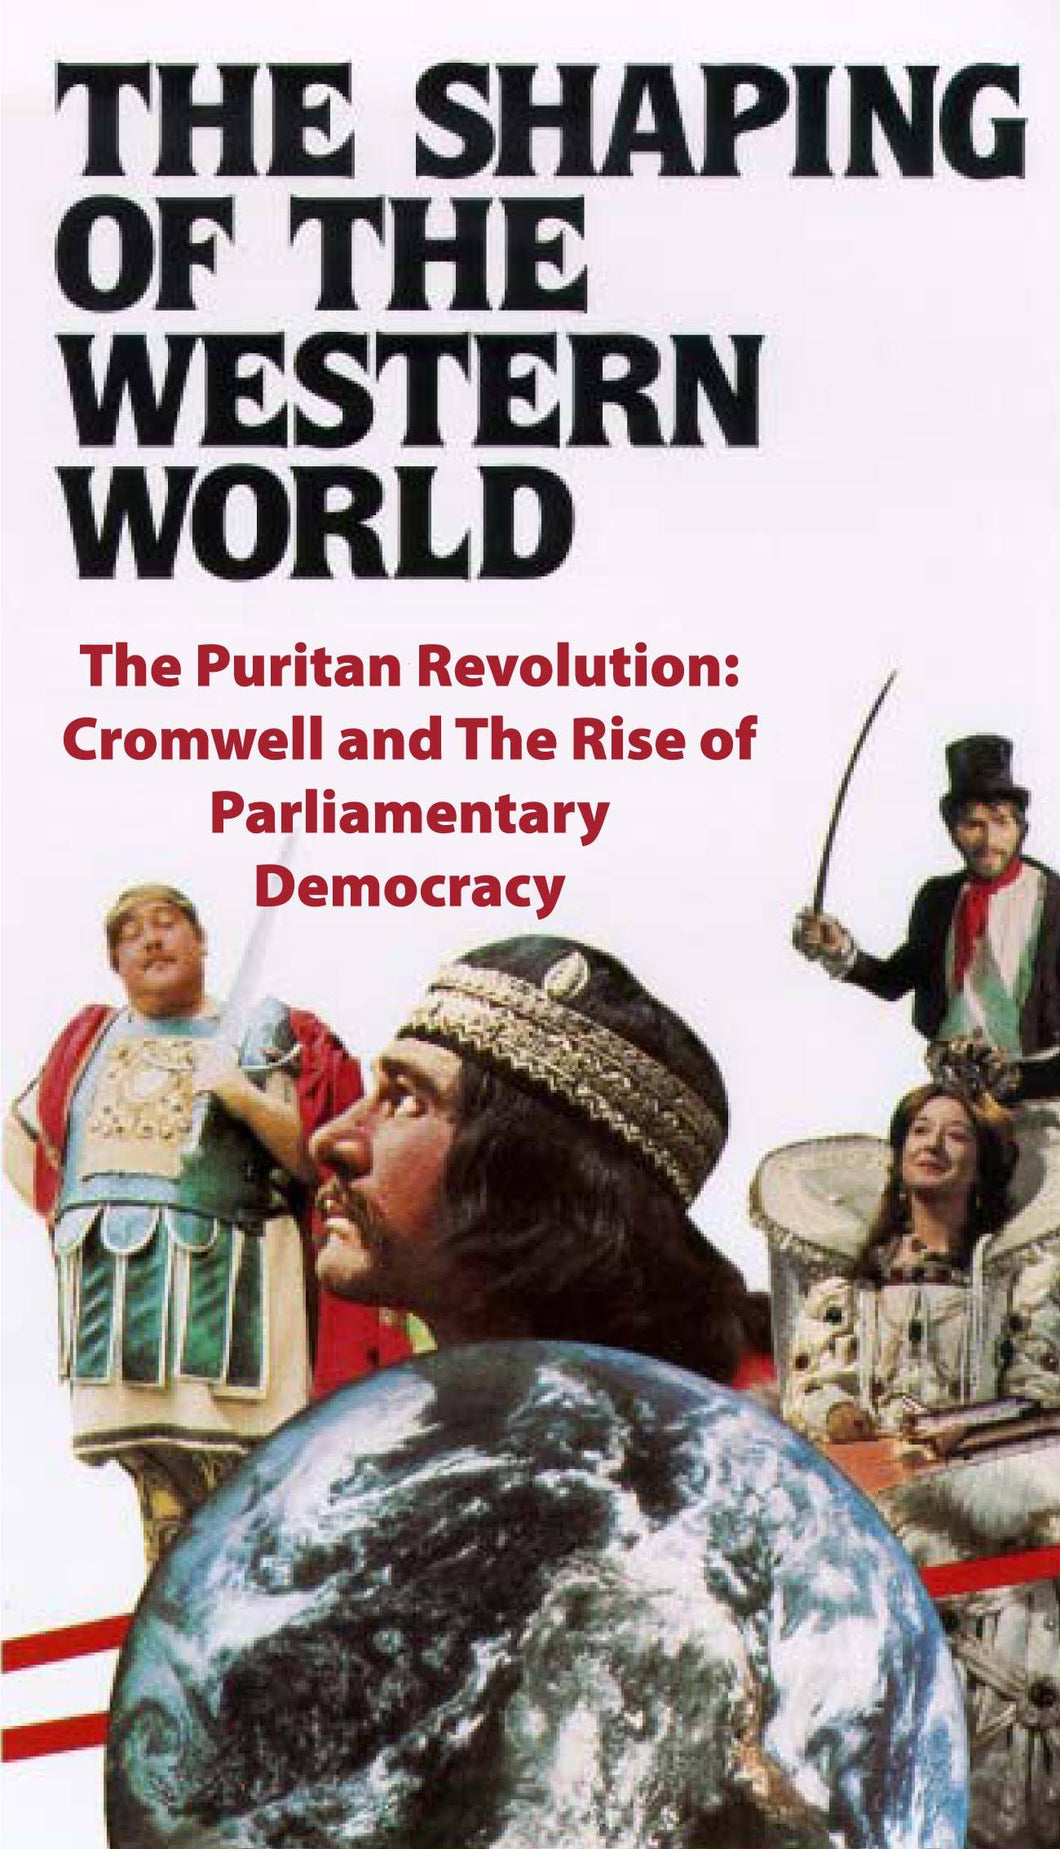 Puritan Revolution: Cromwell and Rise of Parlimentary Democracy